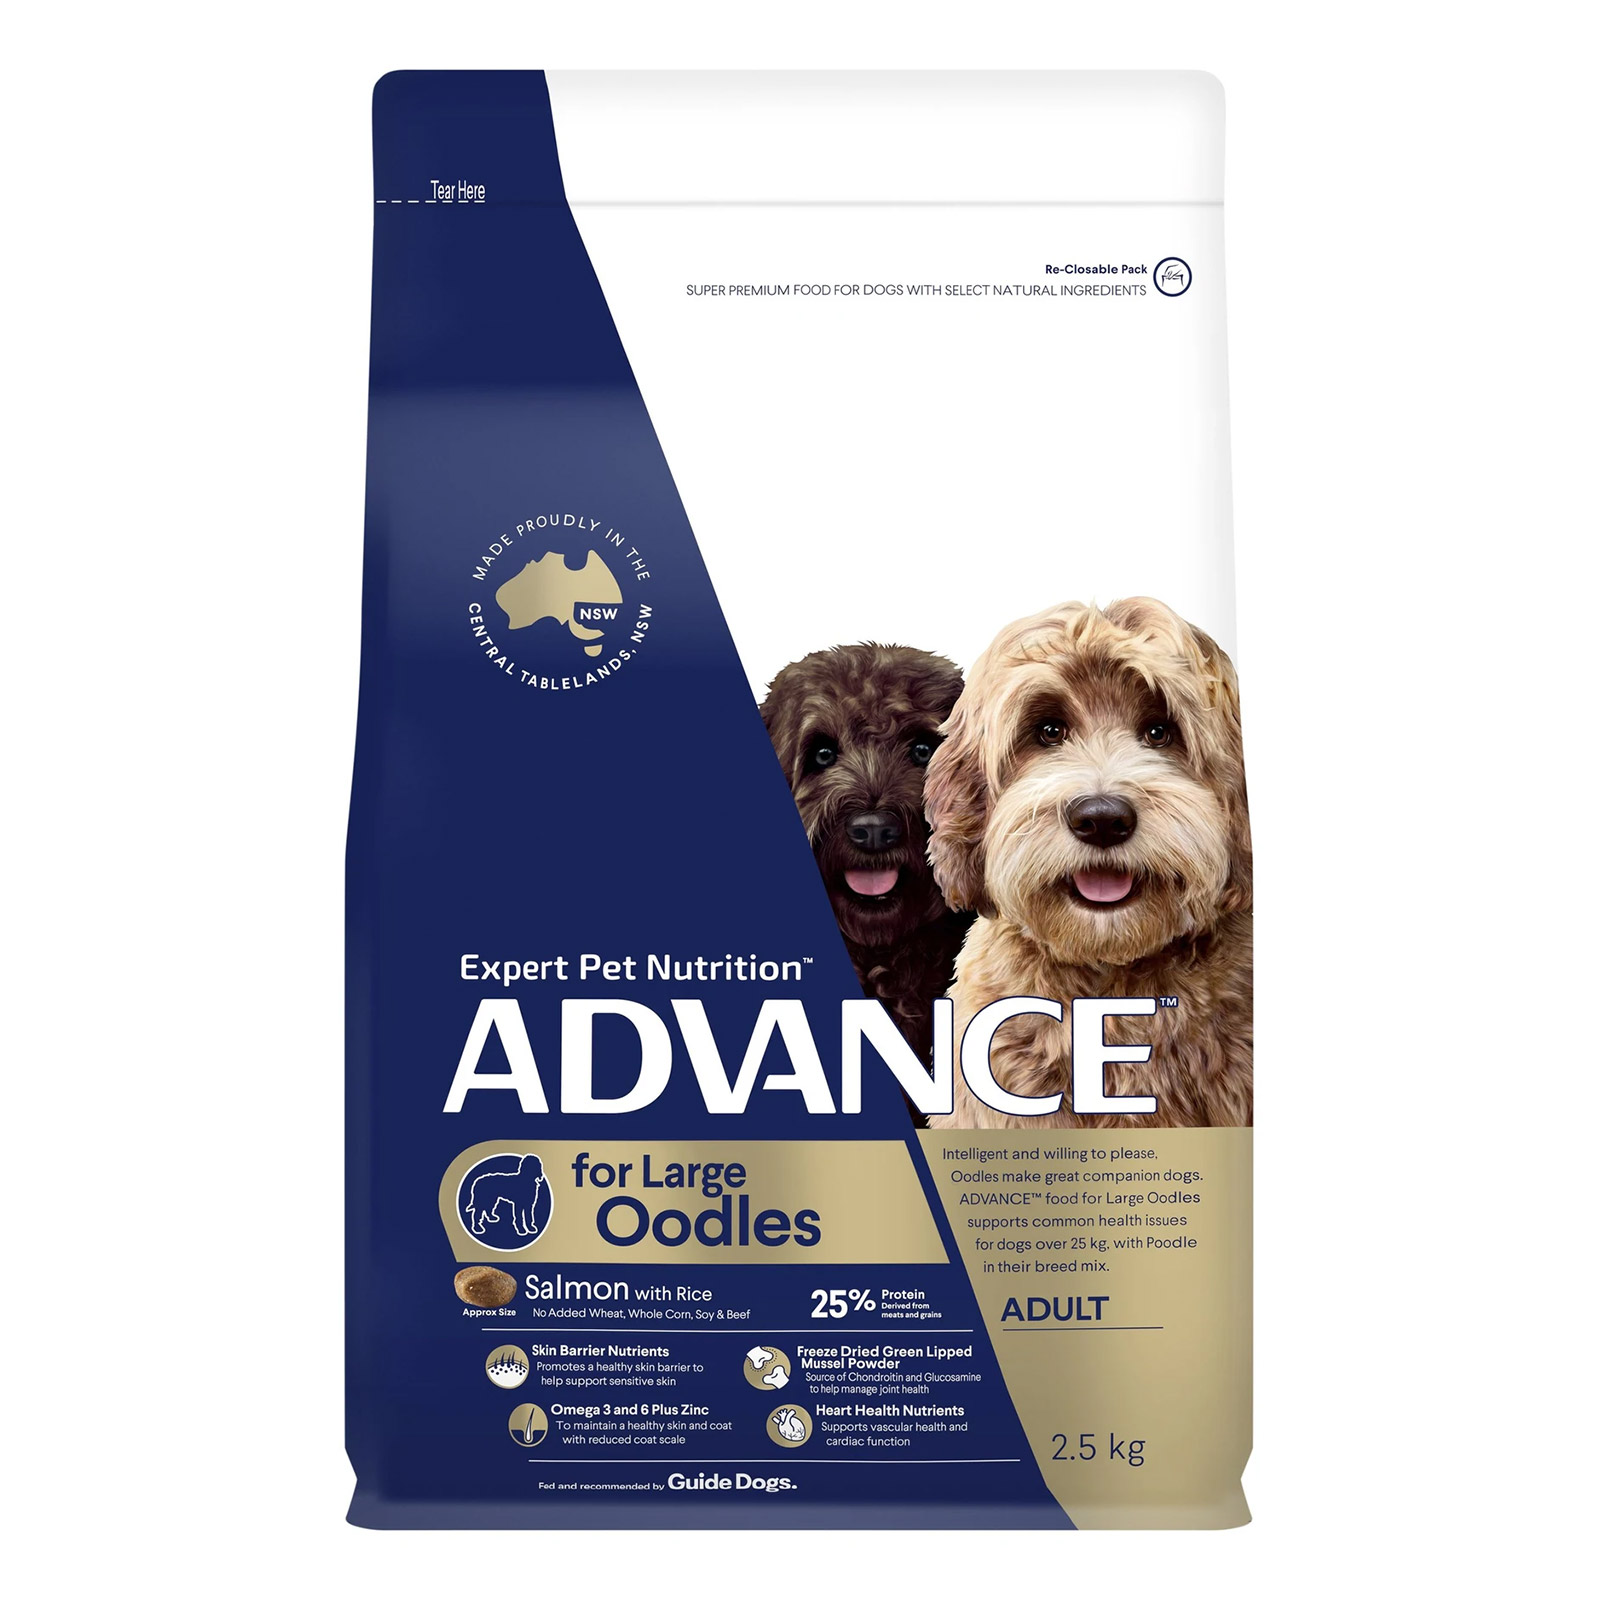 Advance Large Breed Oodles – Salmon with Rice for Food